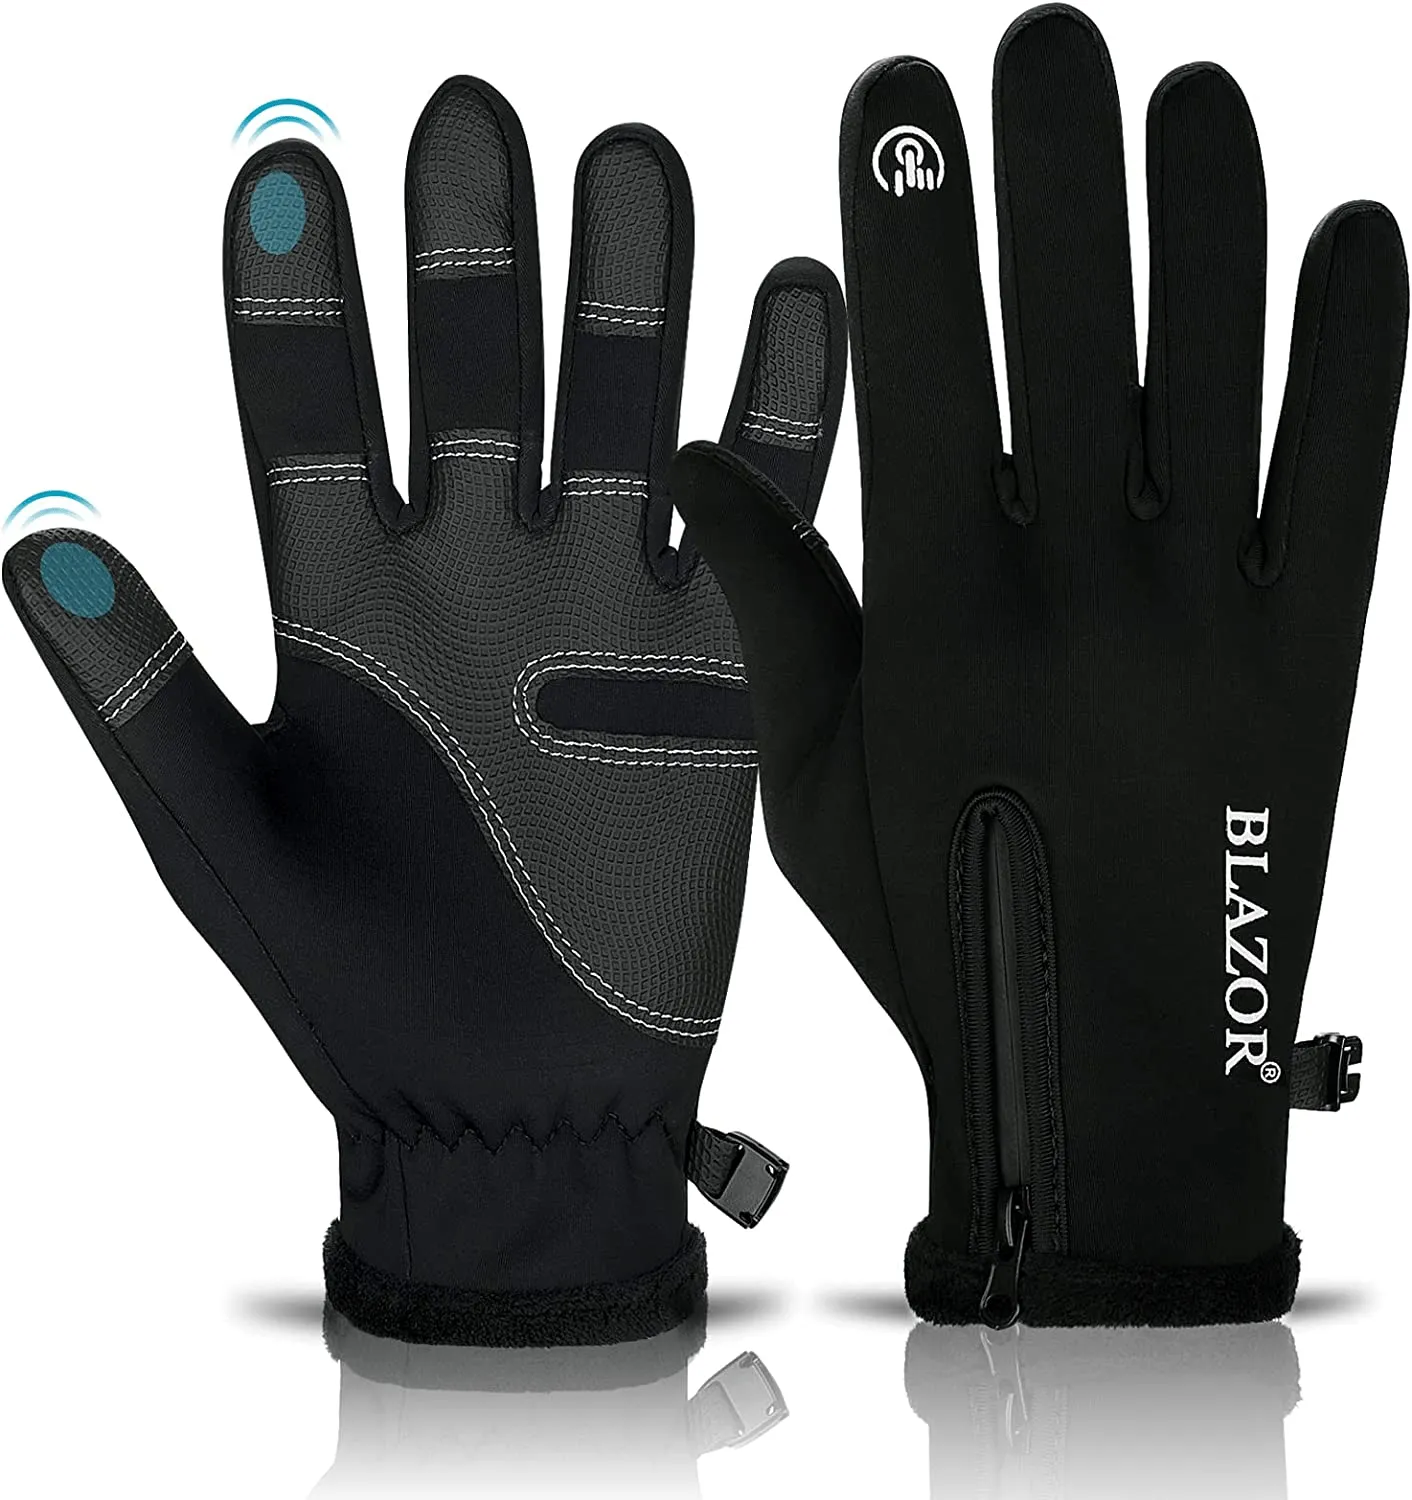 Winter thermal Gloves